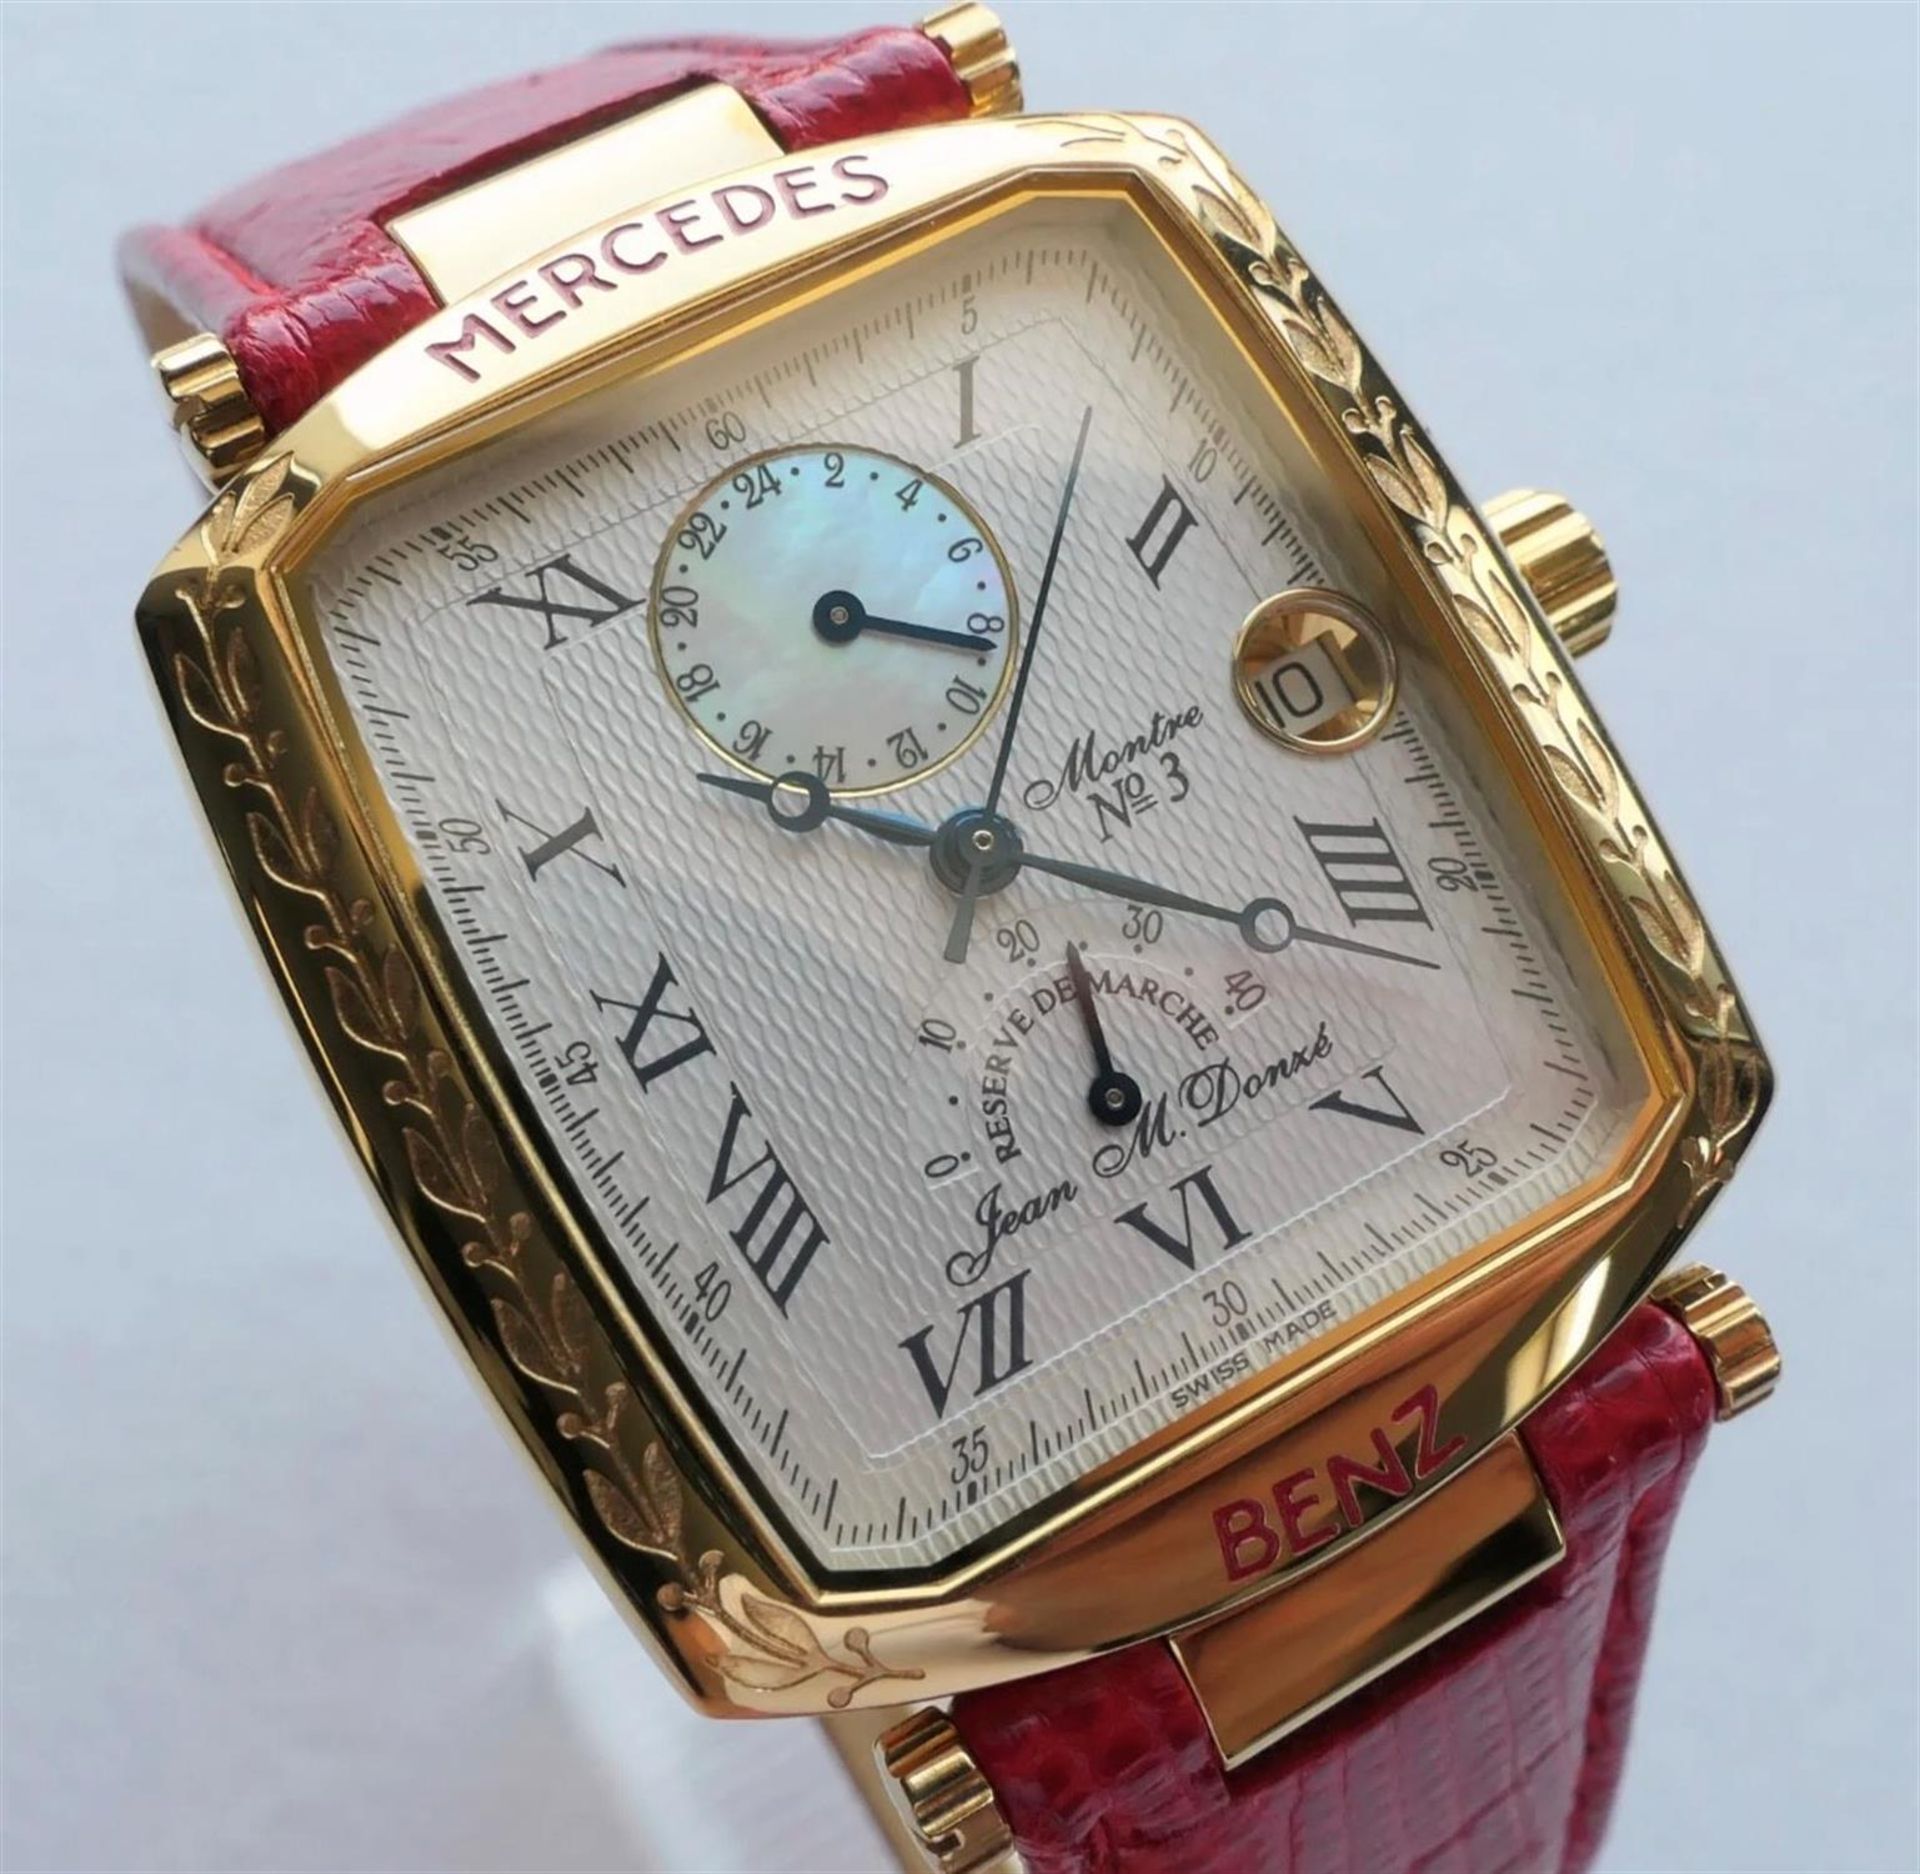 A 18ct Gold-Plated Mercedes-Benz Swiss-Made Automatic Wrist Watch - Image 9 of 10